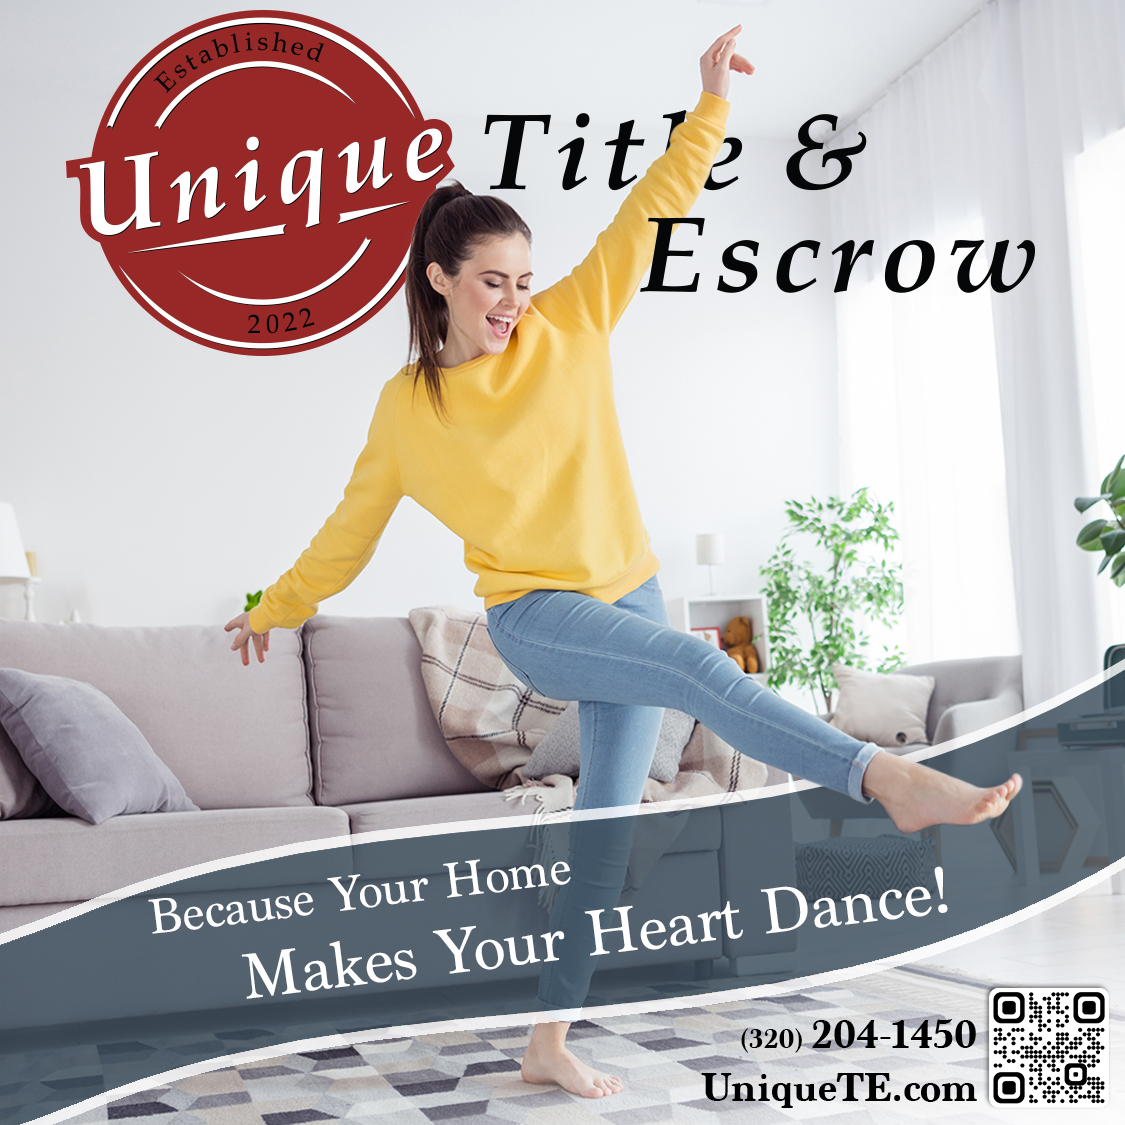 Because Your Home Makes Your Heart Dance! Unique Title and Escrow